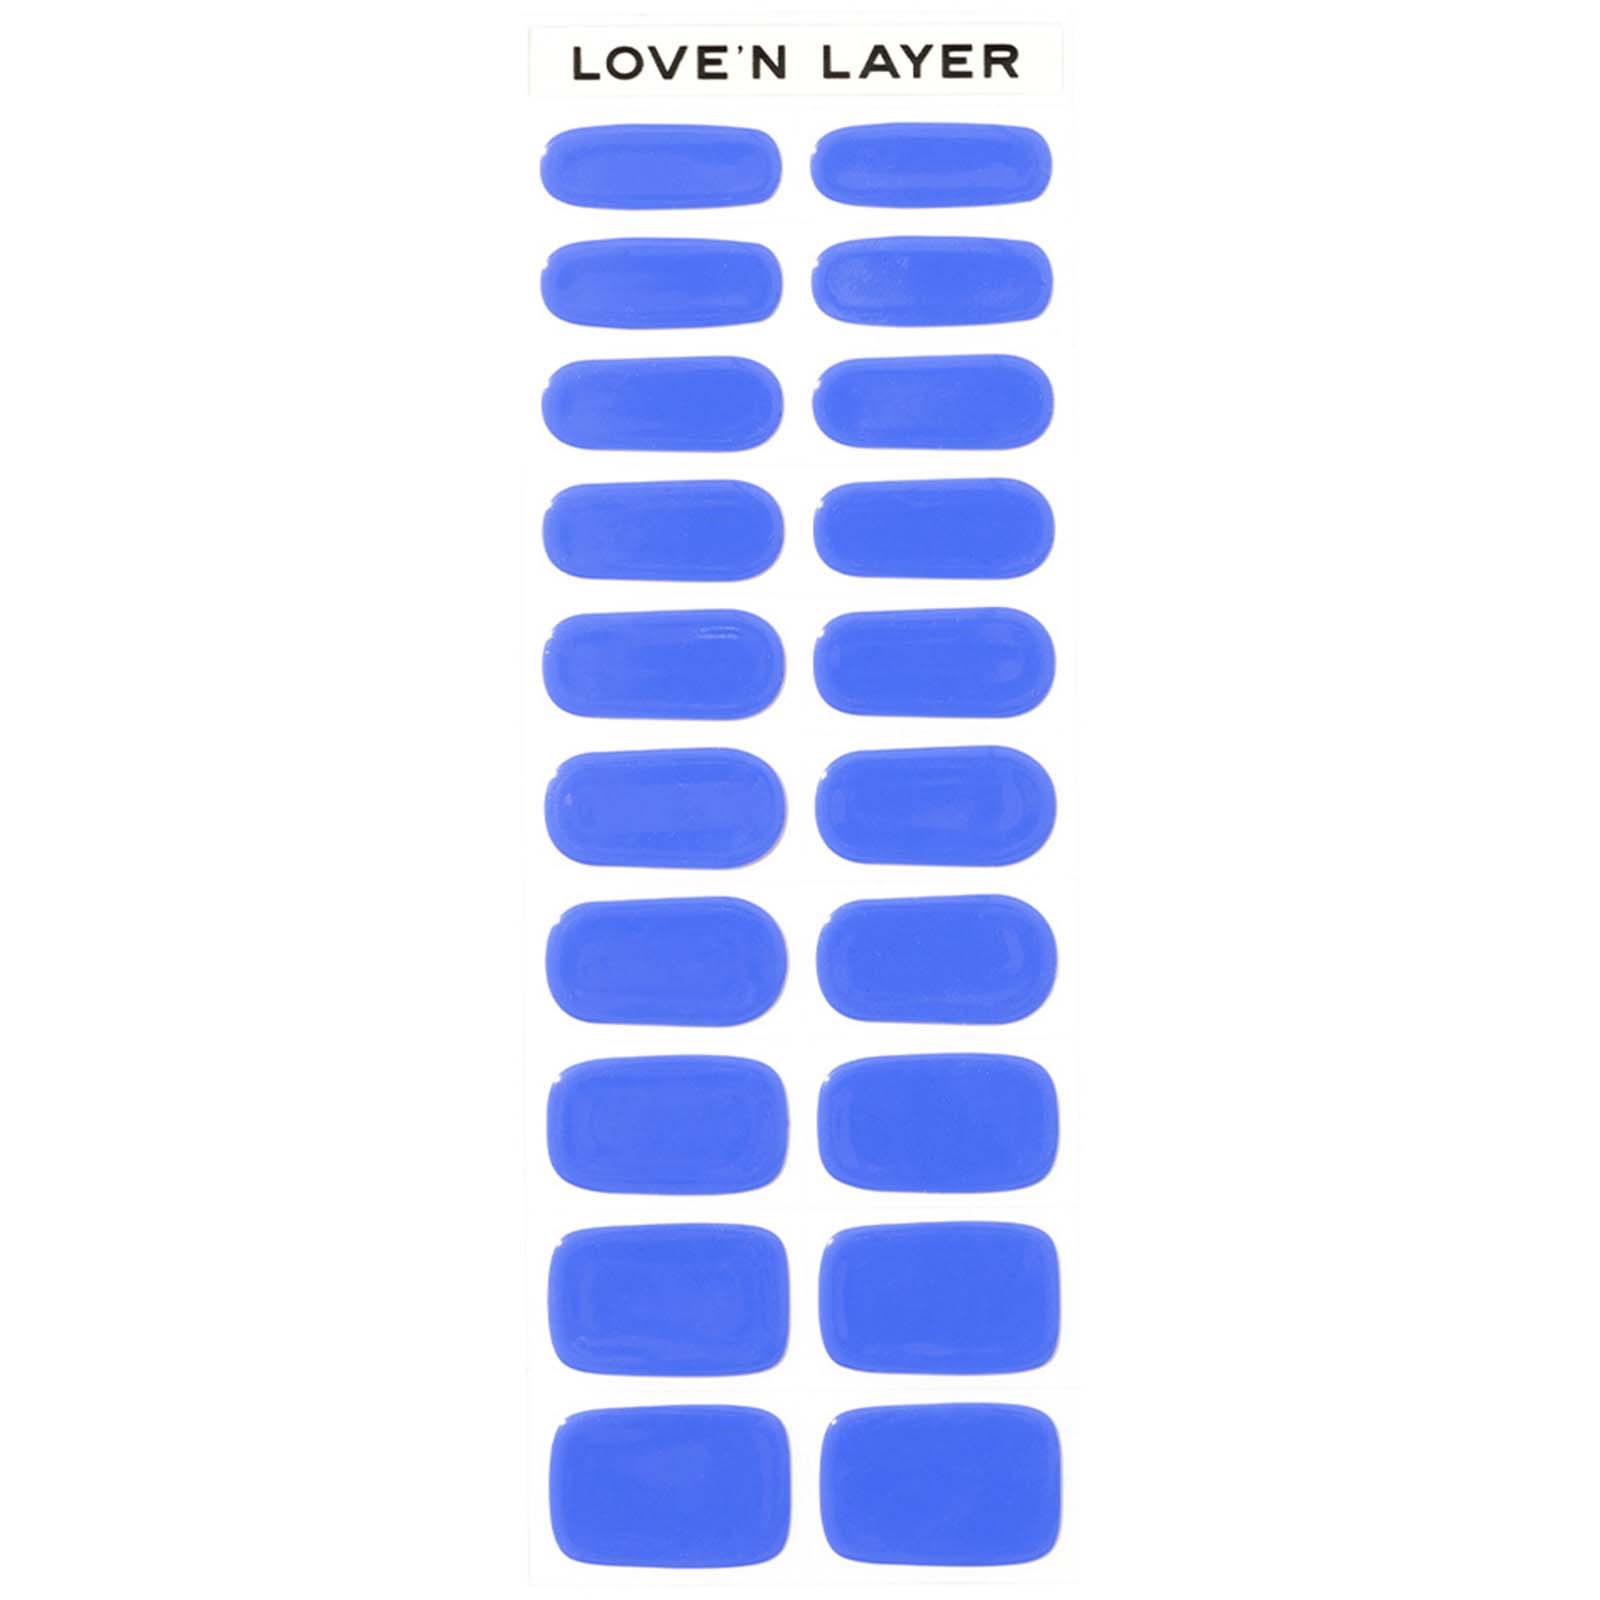 Loven Layer Solid London Blue